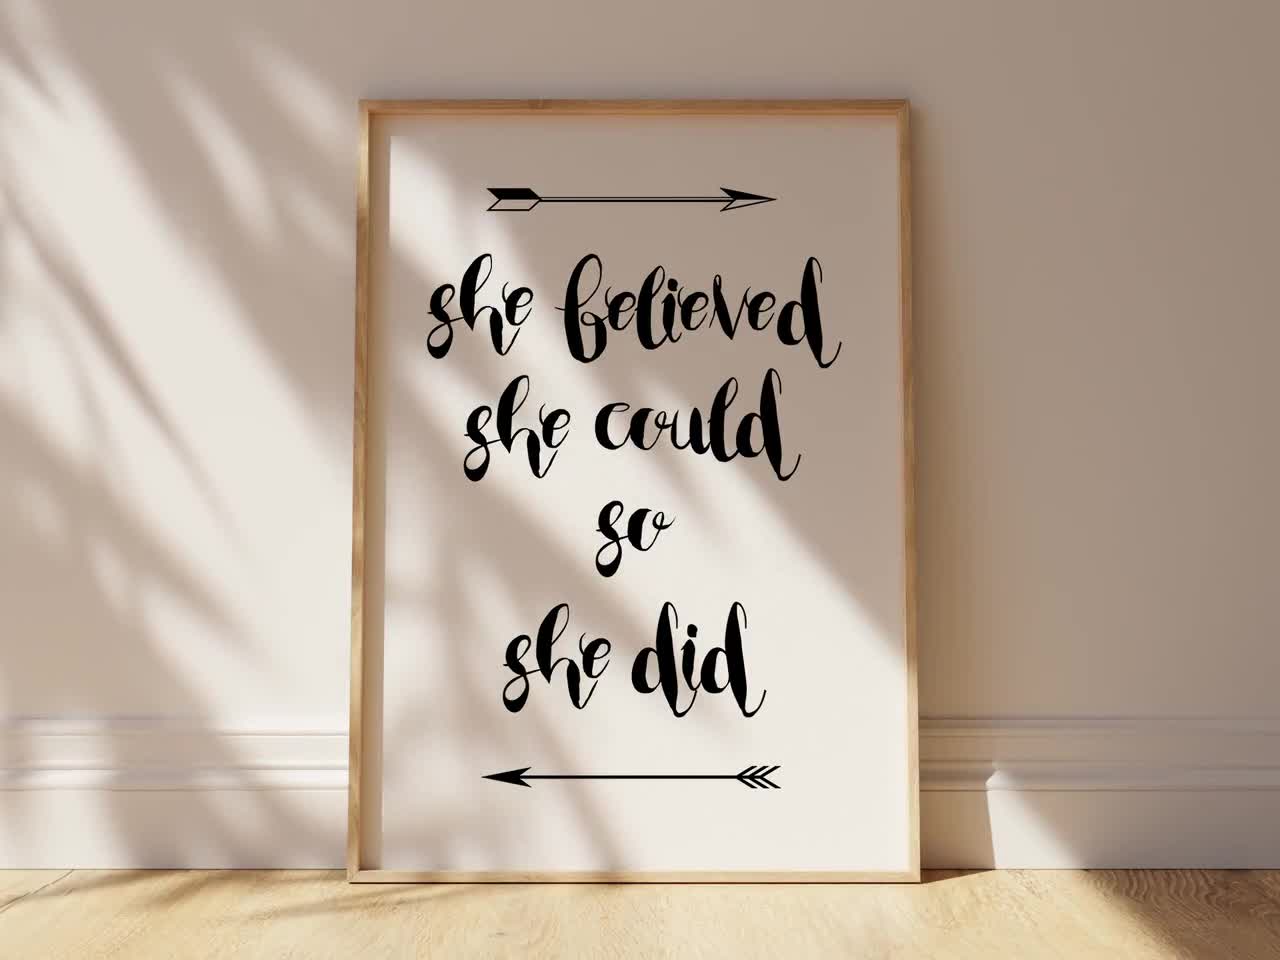 She Feminist Poster, Quotes, Decor, She Could Quote Etsy Art Room - Wall She Girls Believed Teen Monochrome It Picture, Girl Pictures, Did Gift, so